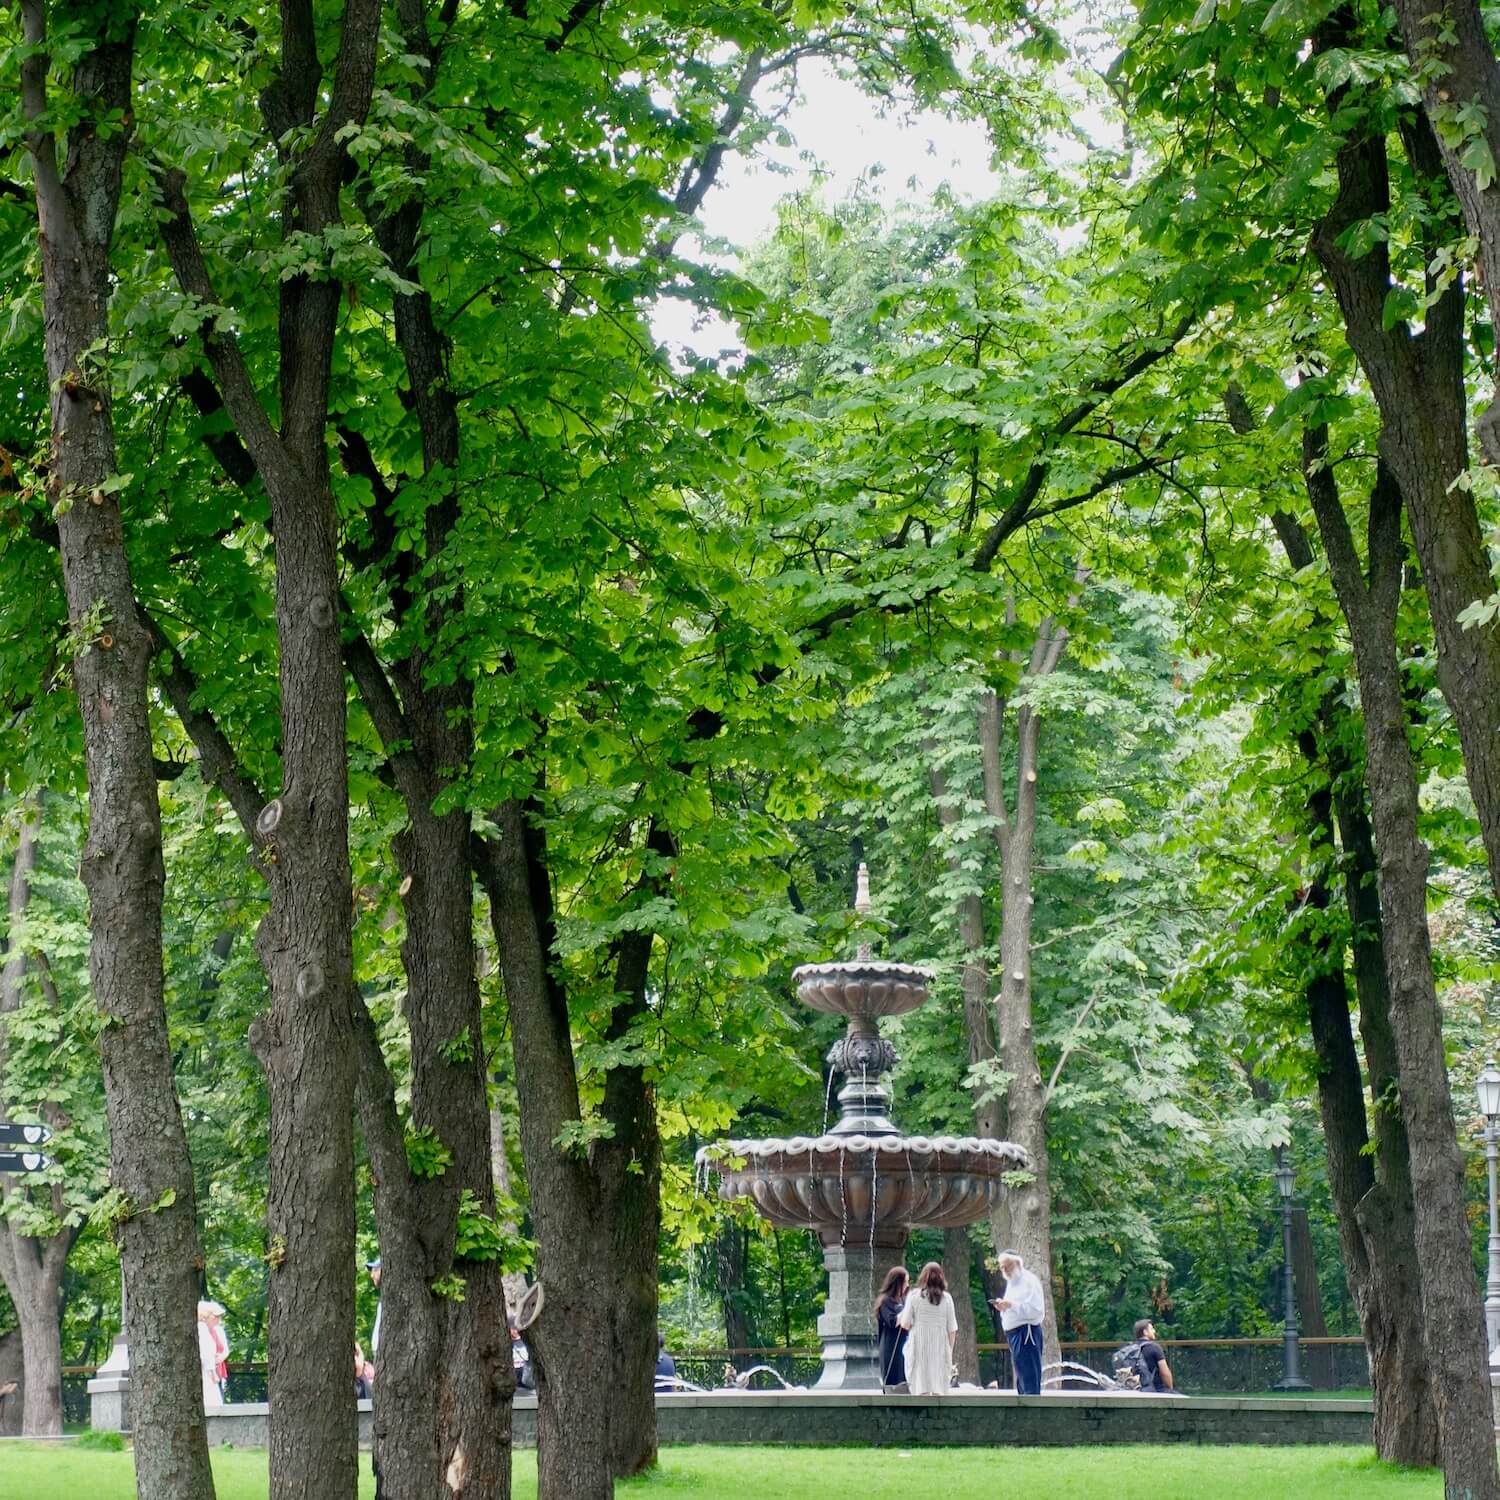 Volodymyr Hill has an abundance of trees and this classic style fountain sits in the middle of all the greenery.